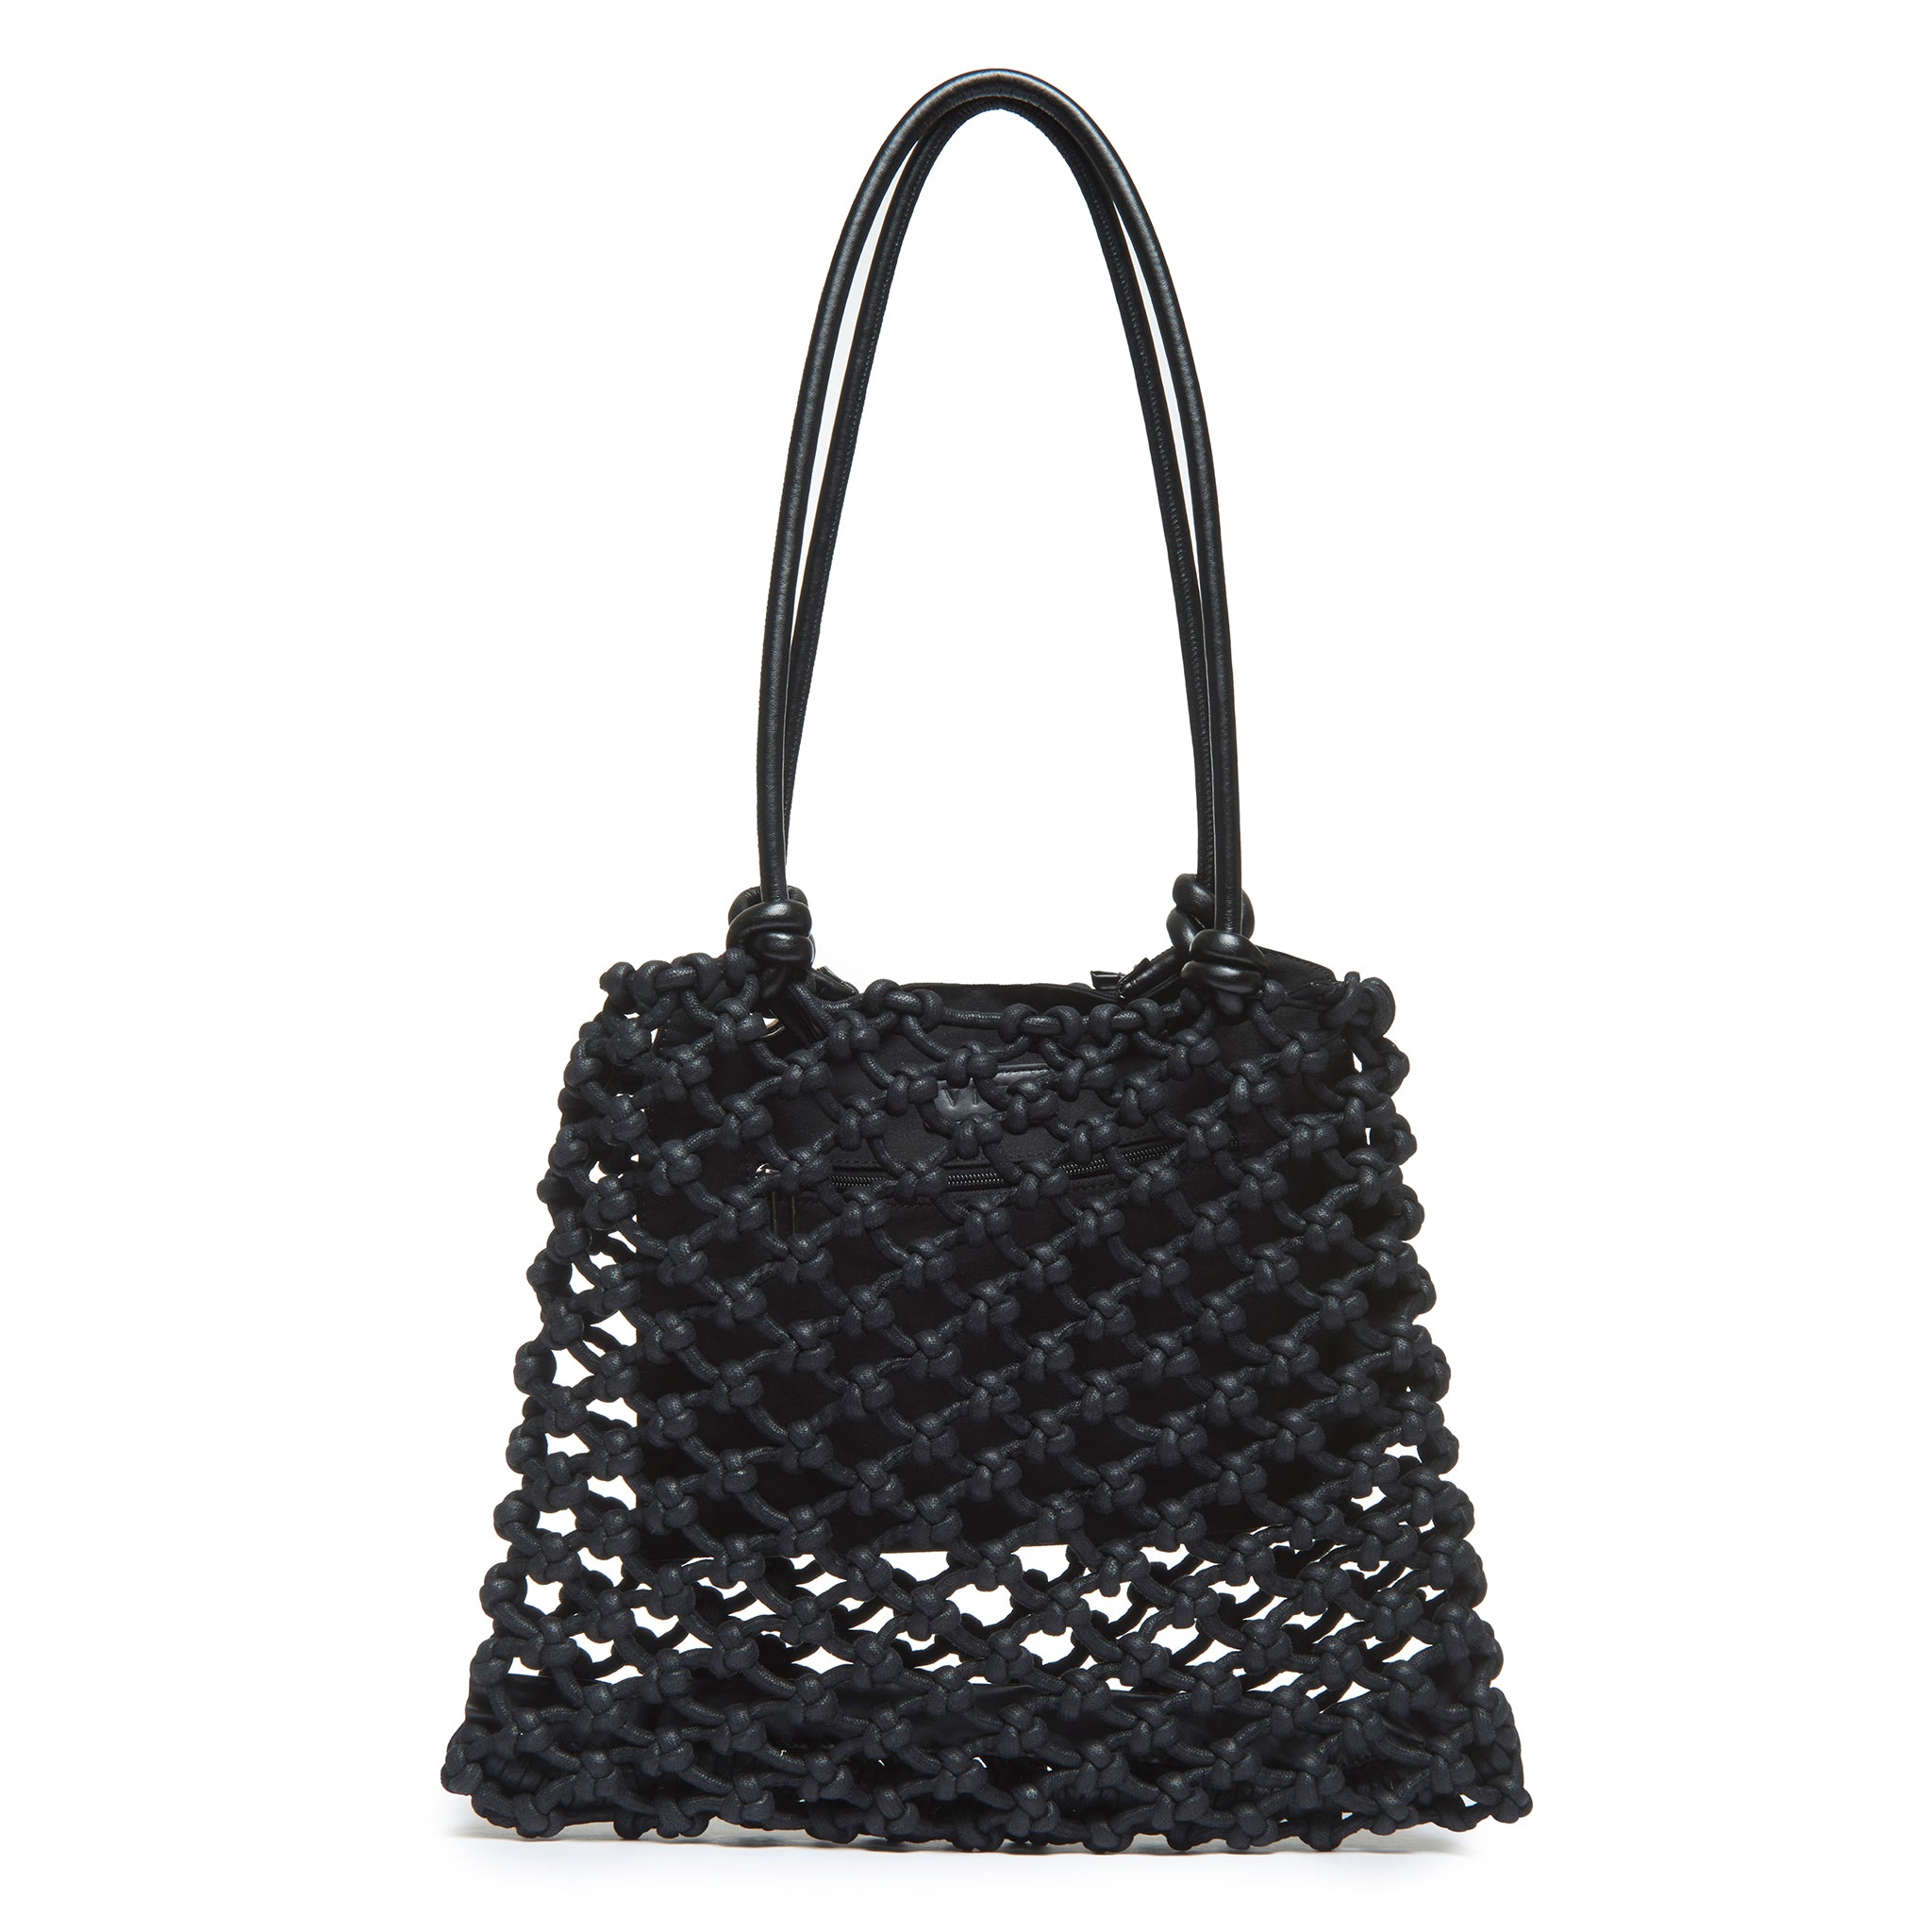 Isa knotted tote bag leather handles